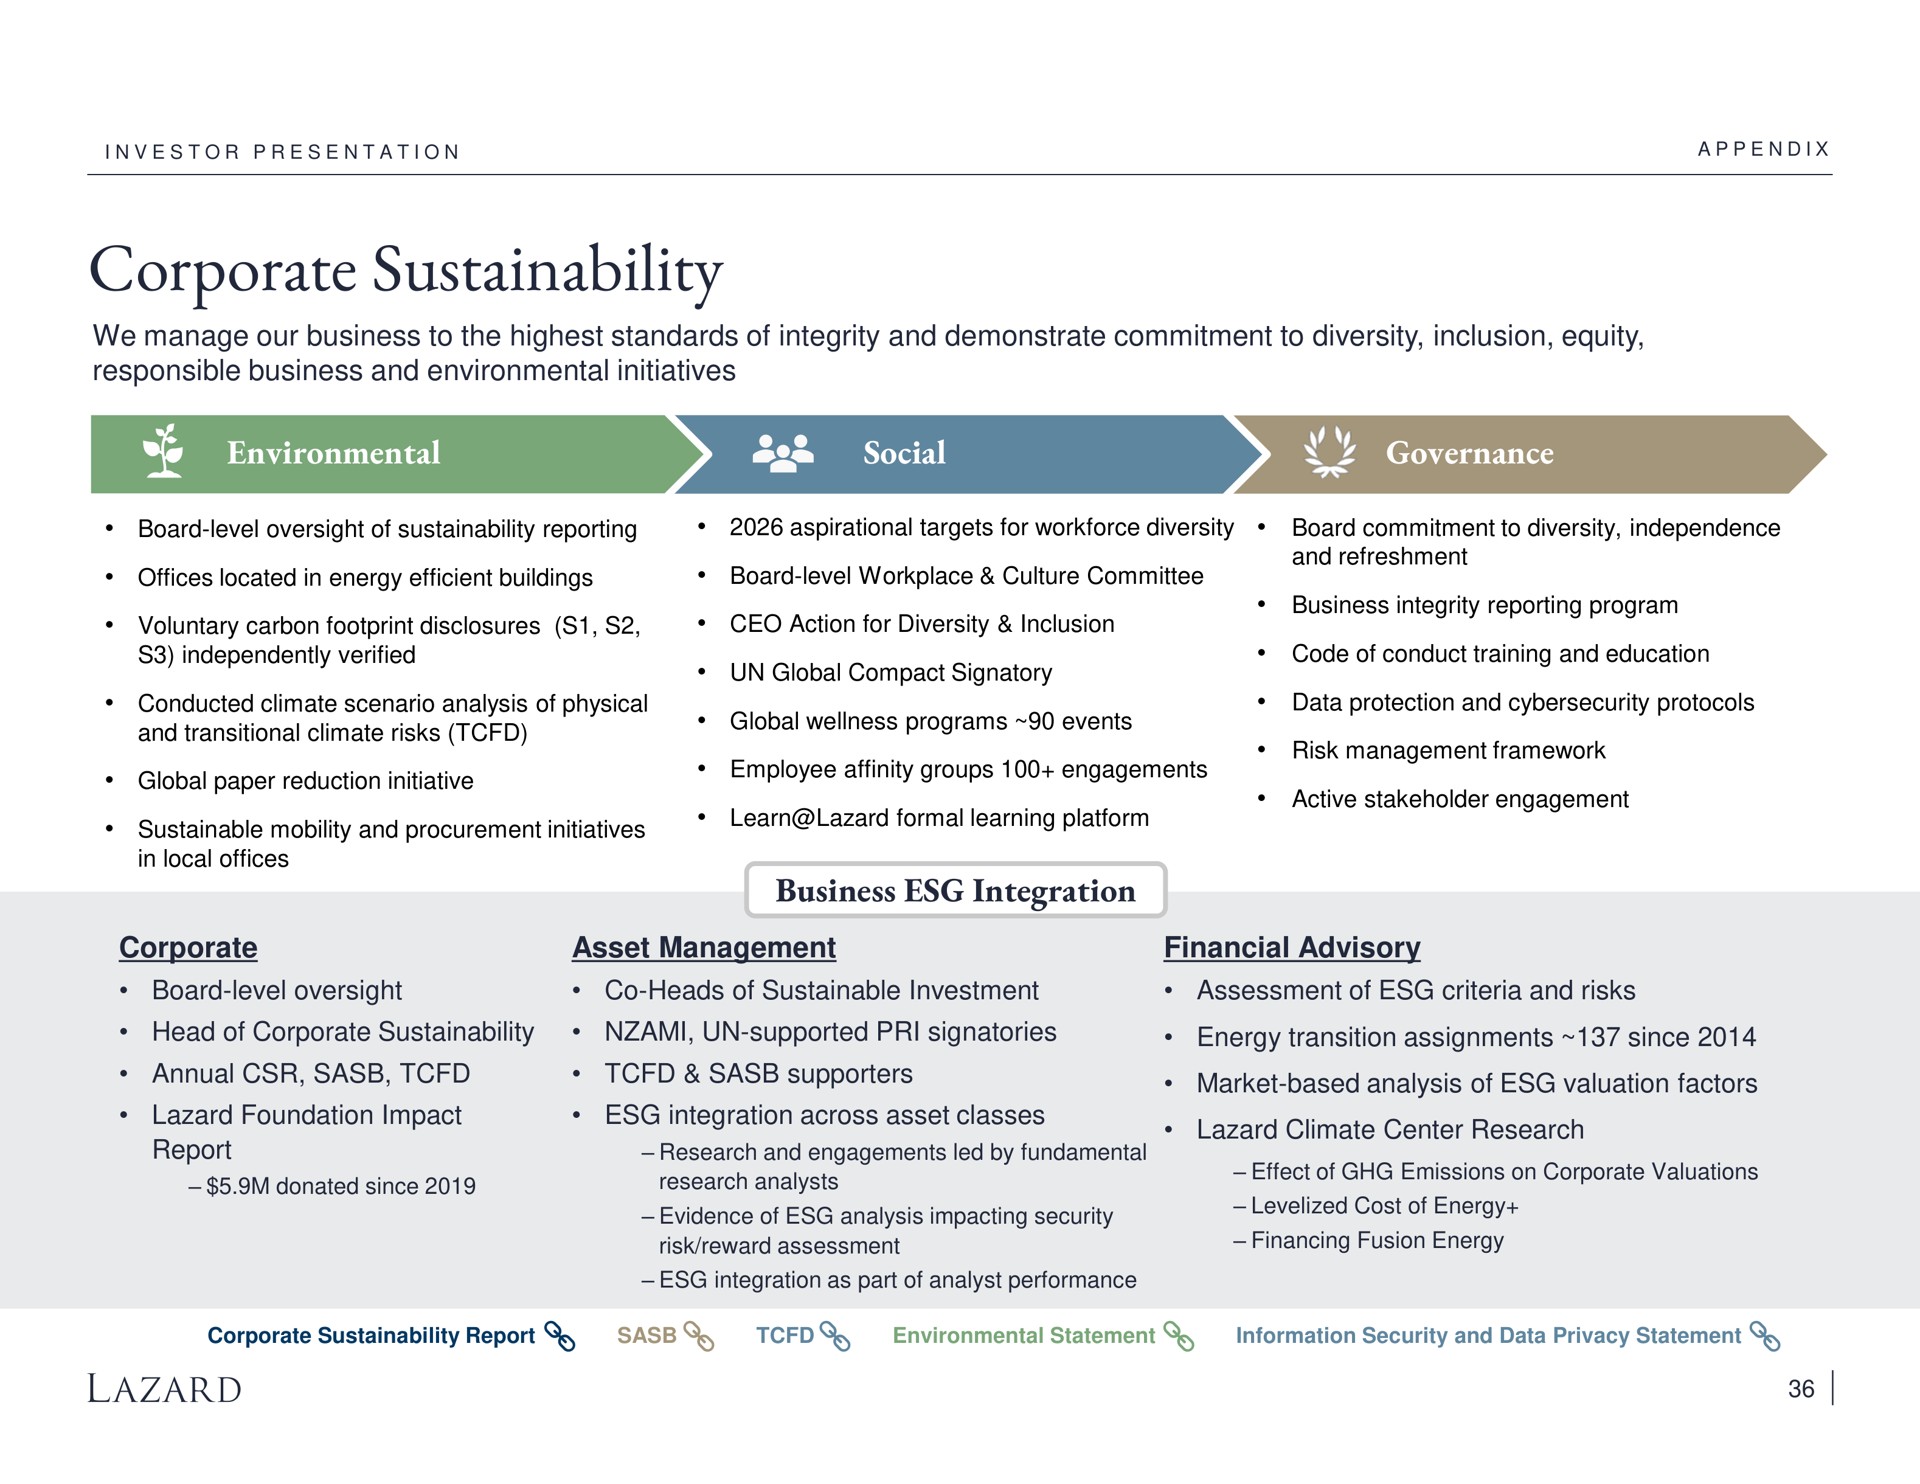 corporate environmental social governance business integration and transitional climate risks global wellness programs events market based analysis of valuation factors | Lazard